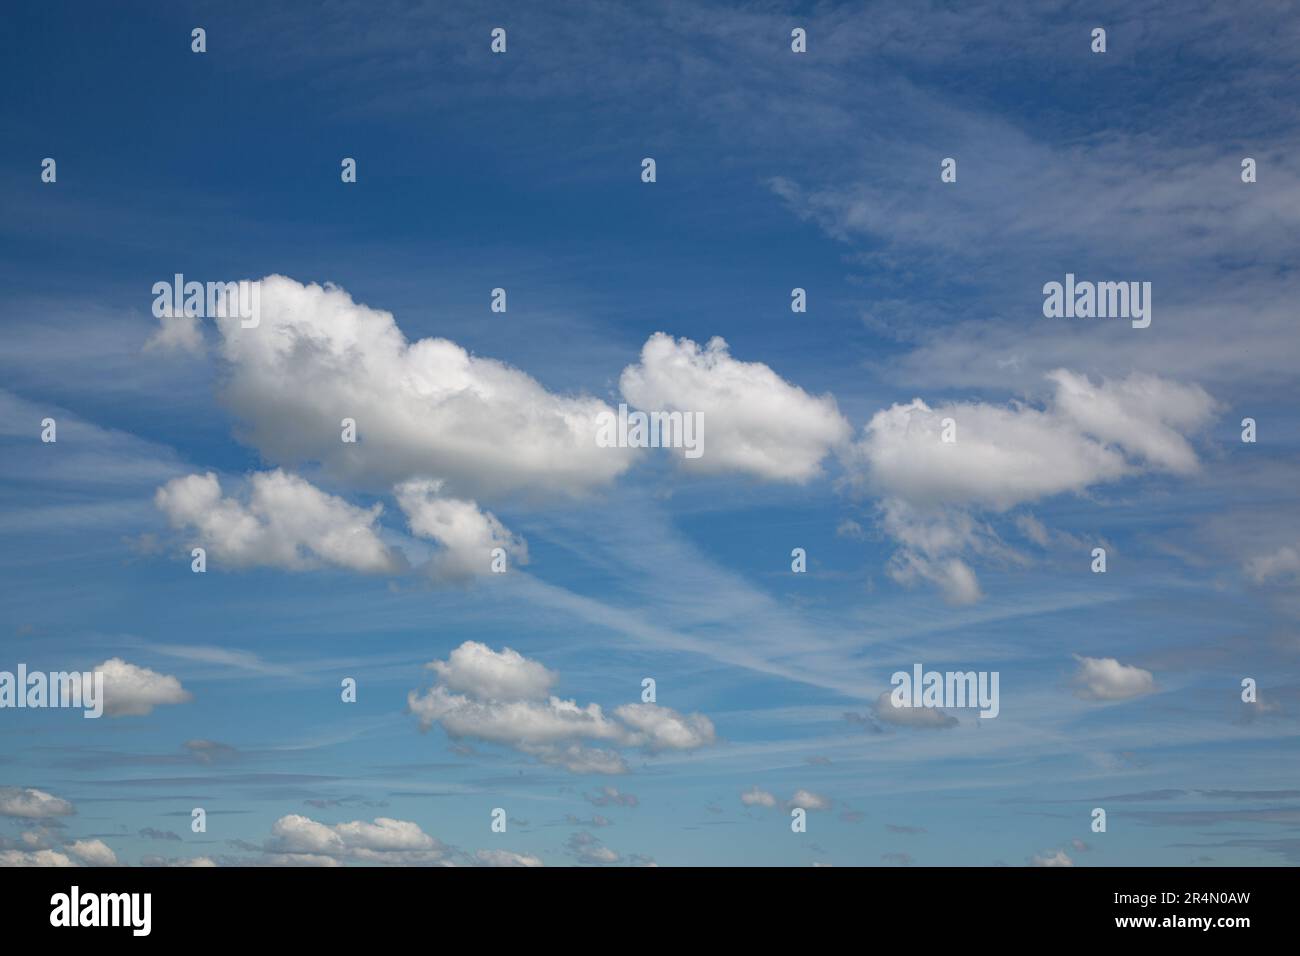 Clouds formed by chemtrails left by airplanes Stock Photo